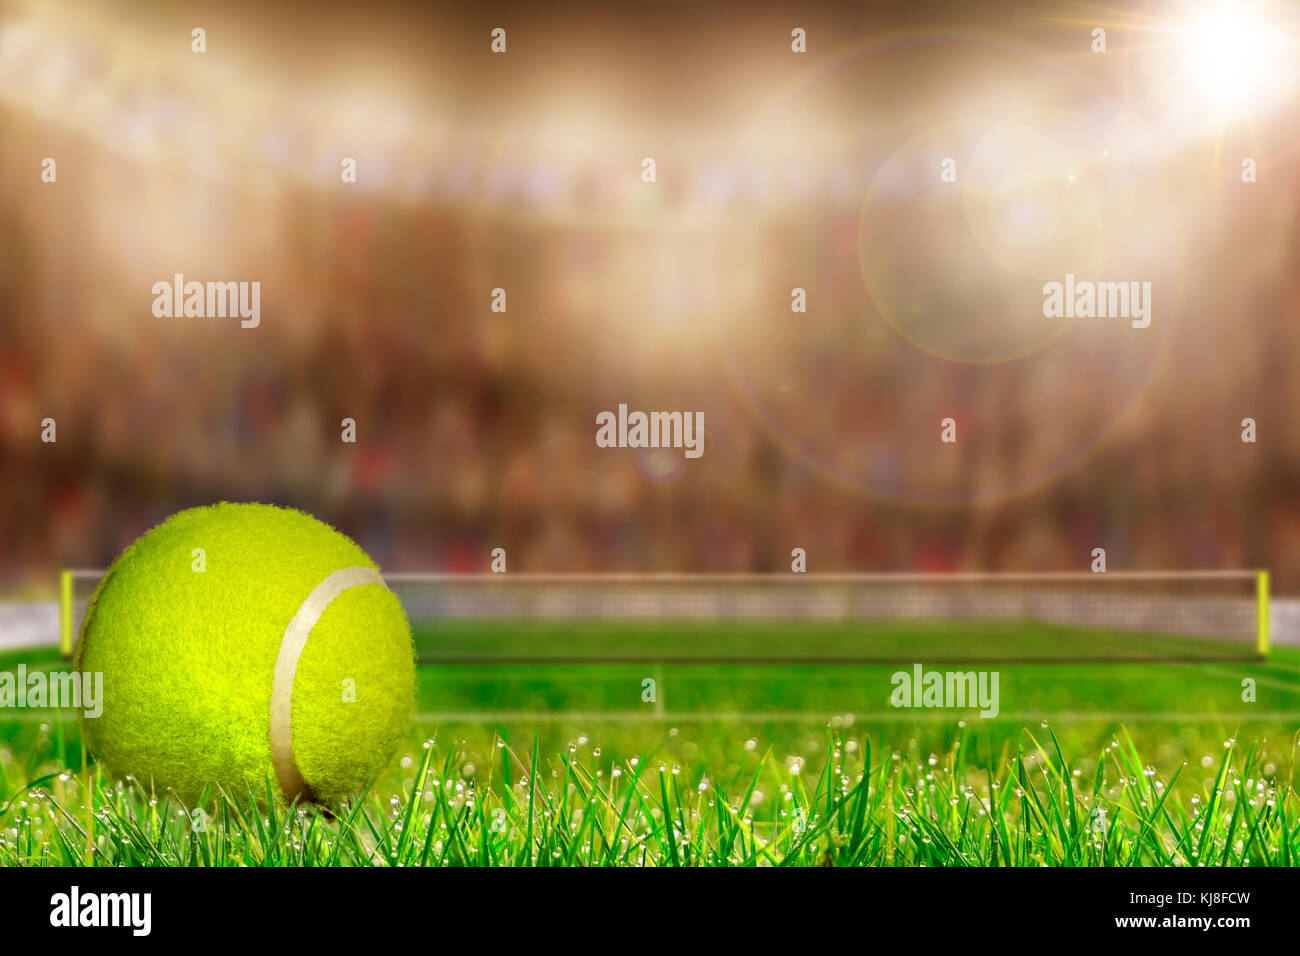 Low angle view of tennis ball on grass court and deliberate shallow depth of field on brightly lit stadium background with copy space. Stock Photo